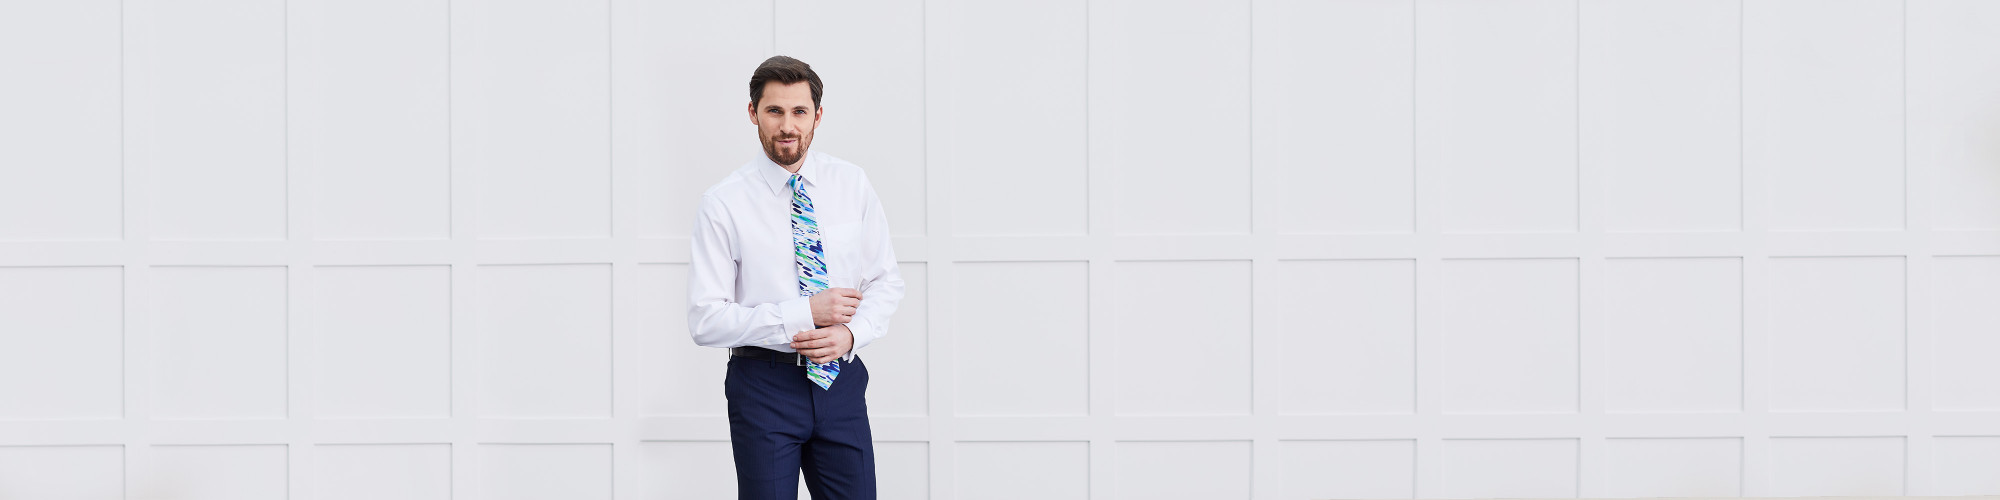 How to Roll Up Your Shirt Sleeves